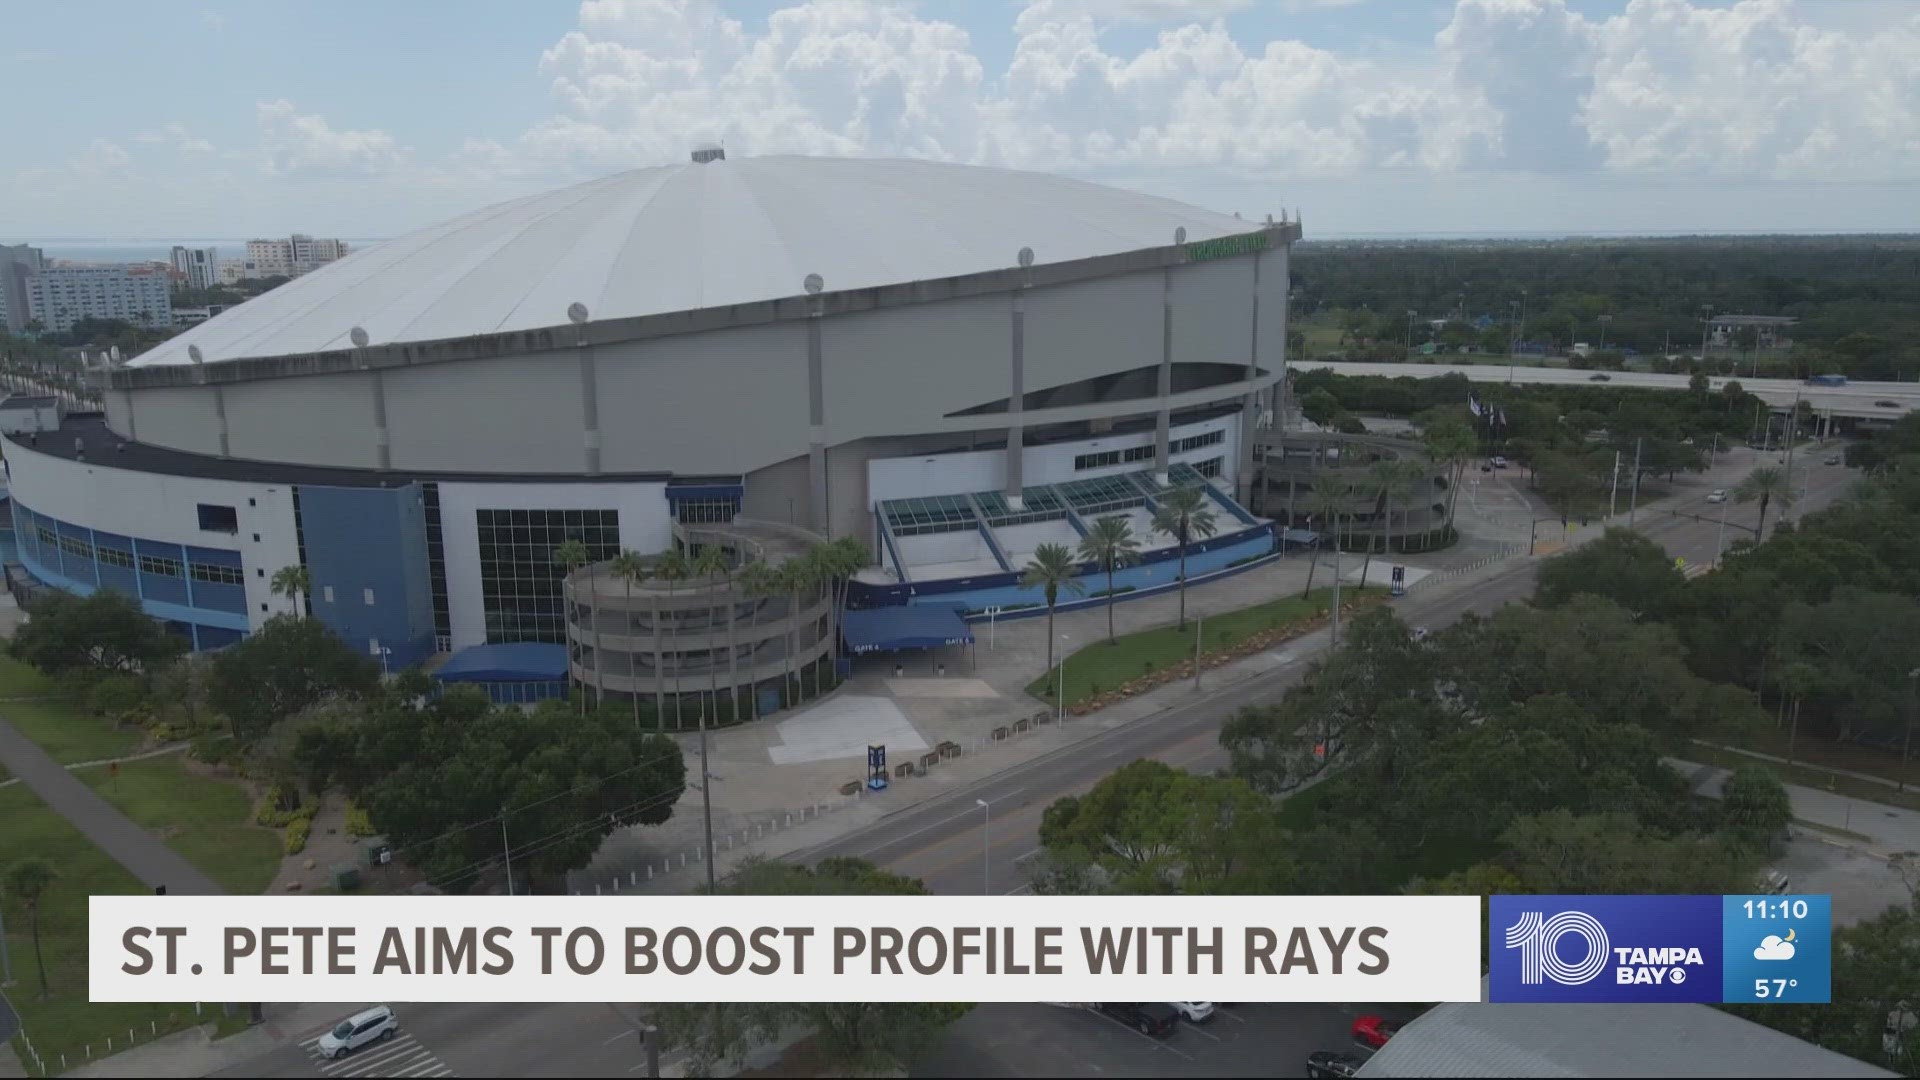 The Rays adamantly oppose changing the team name to the St. Petersburg Rays, as some on the city council and in the business community have suggested.